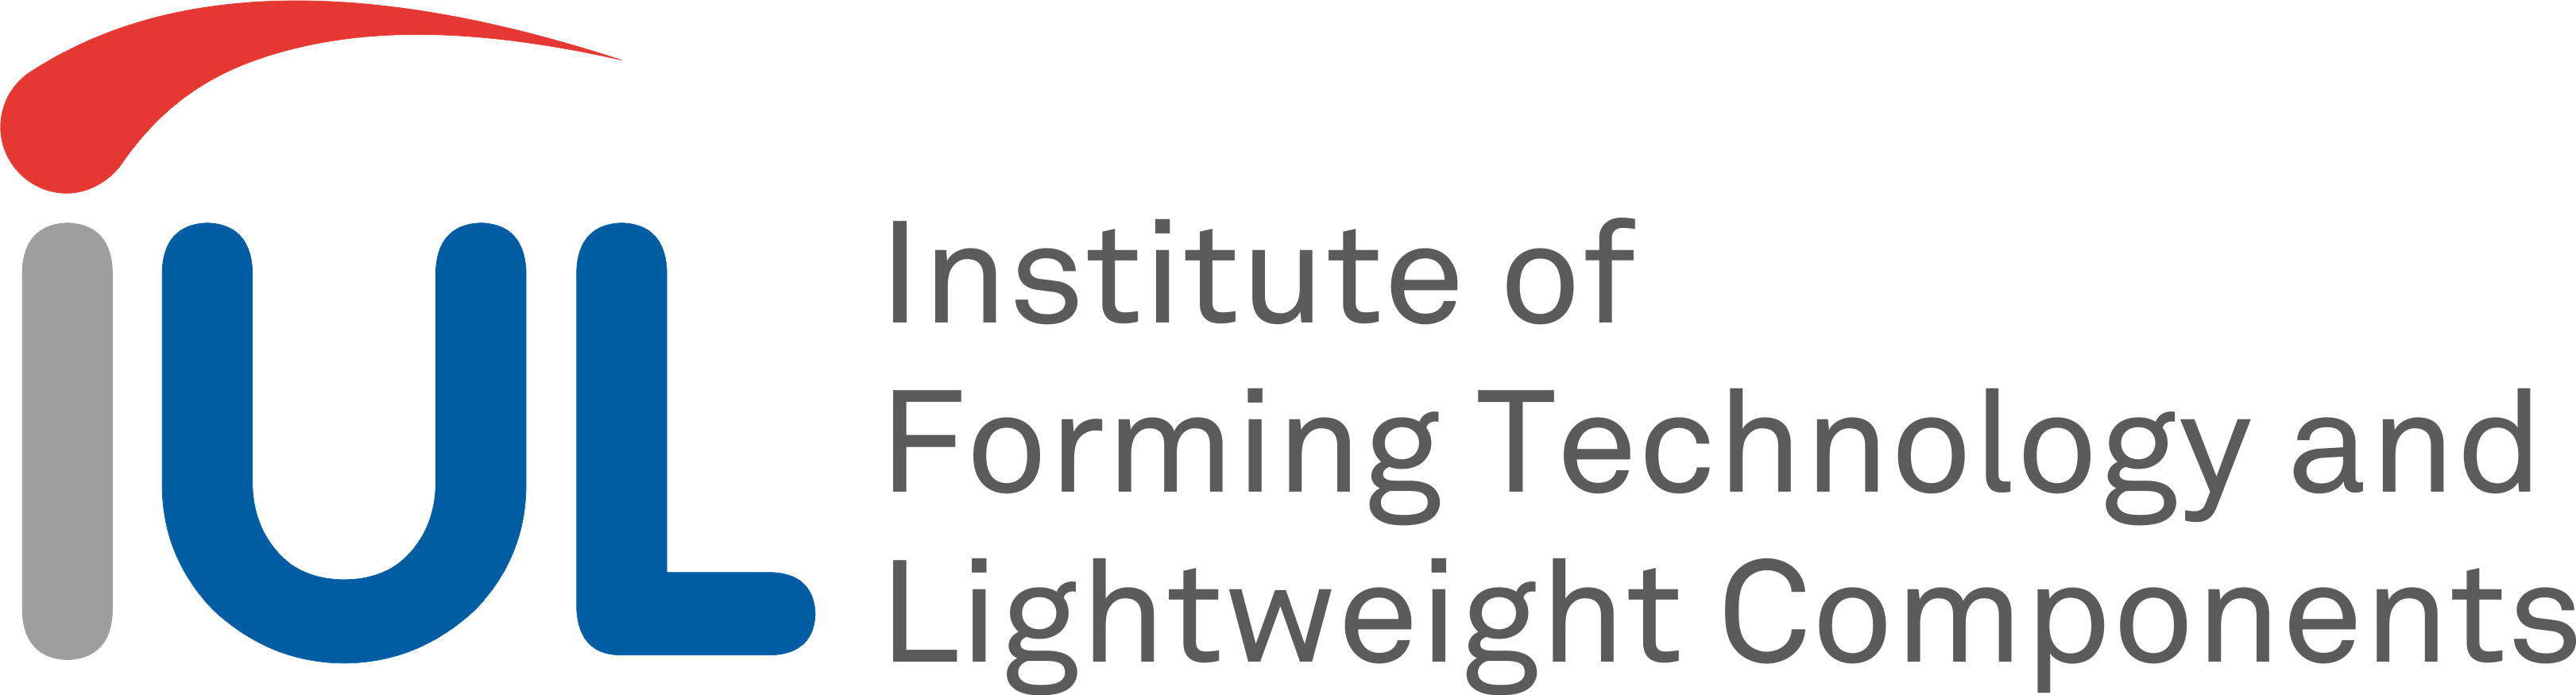 Institute of Forming Technology and Lightweight Components